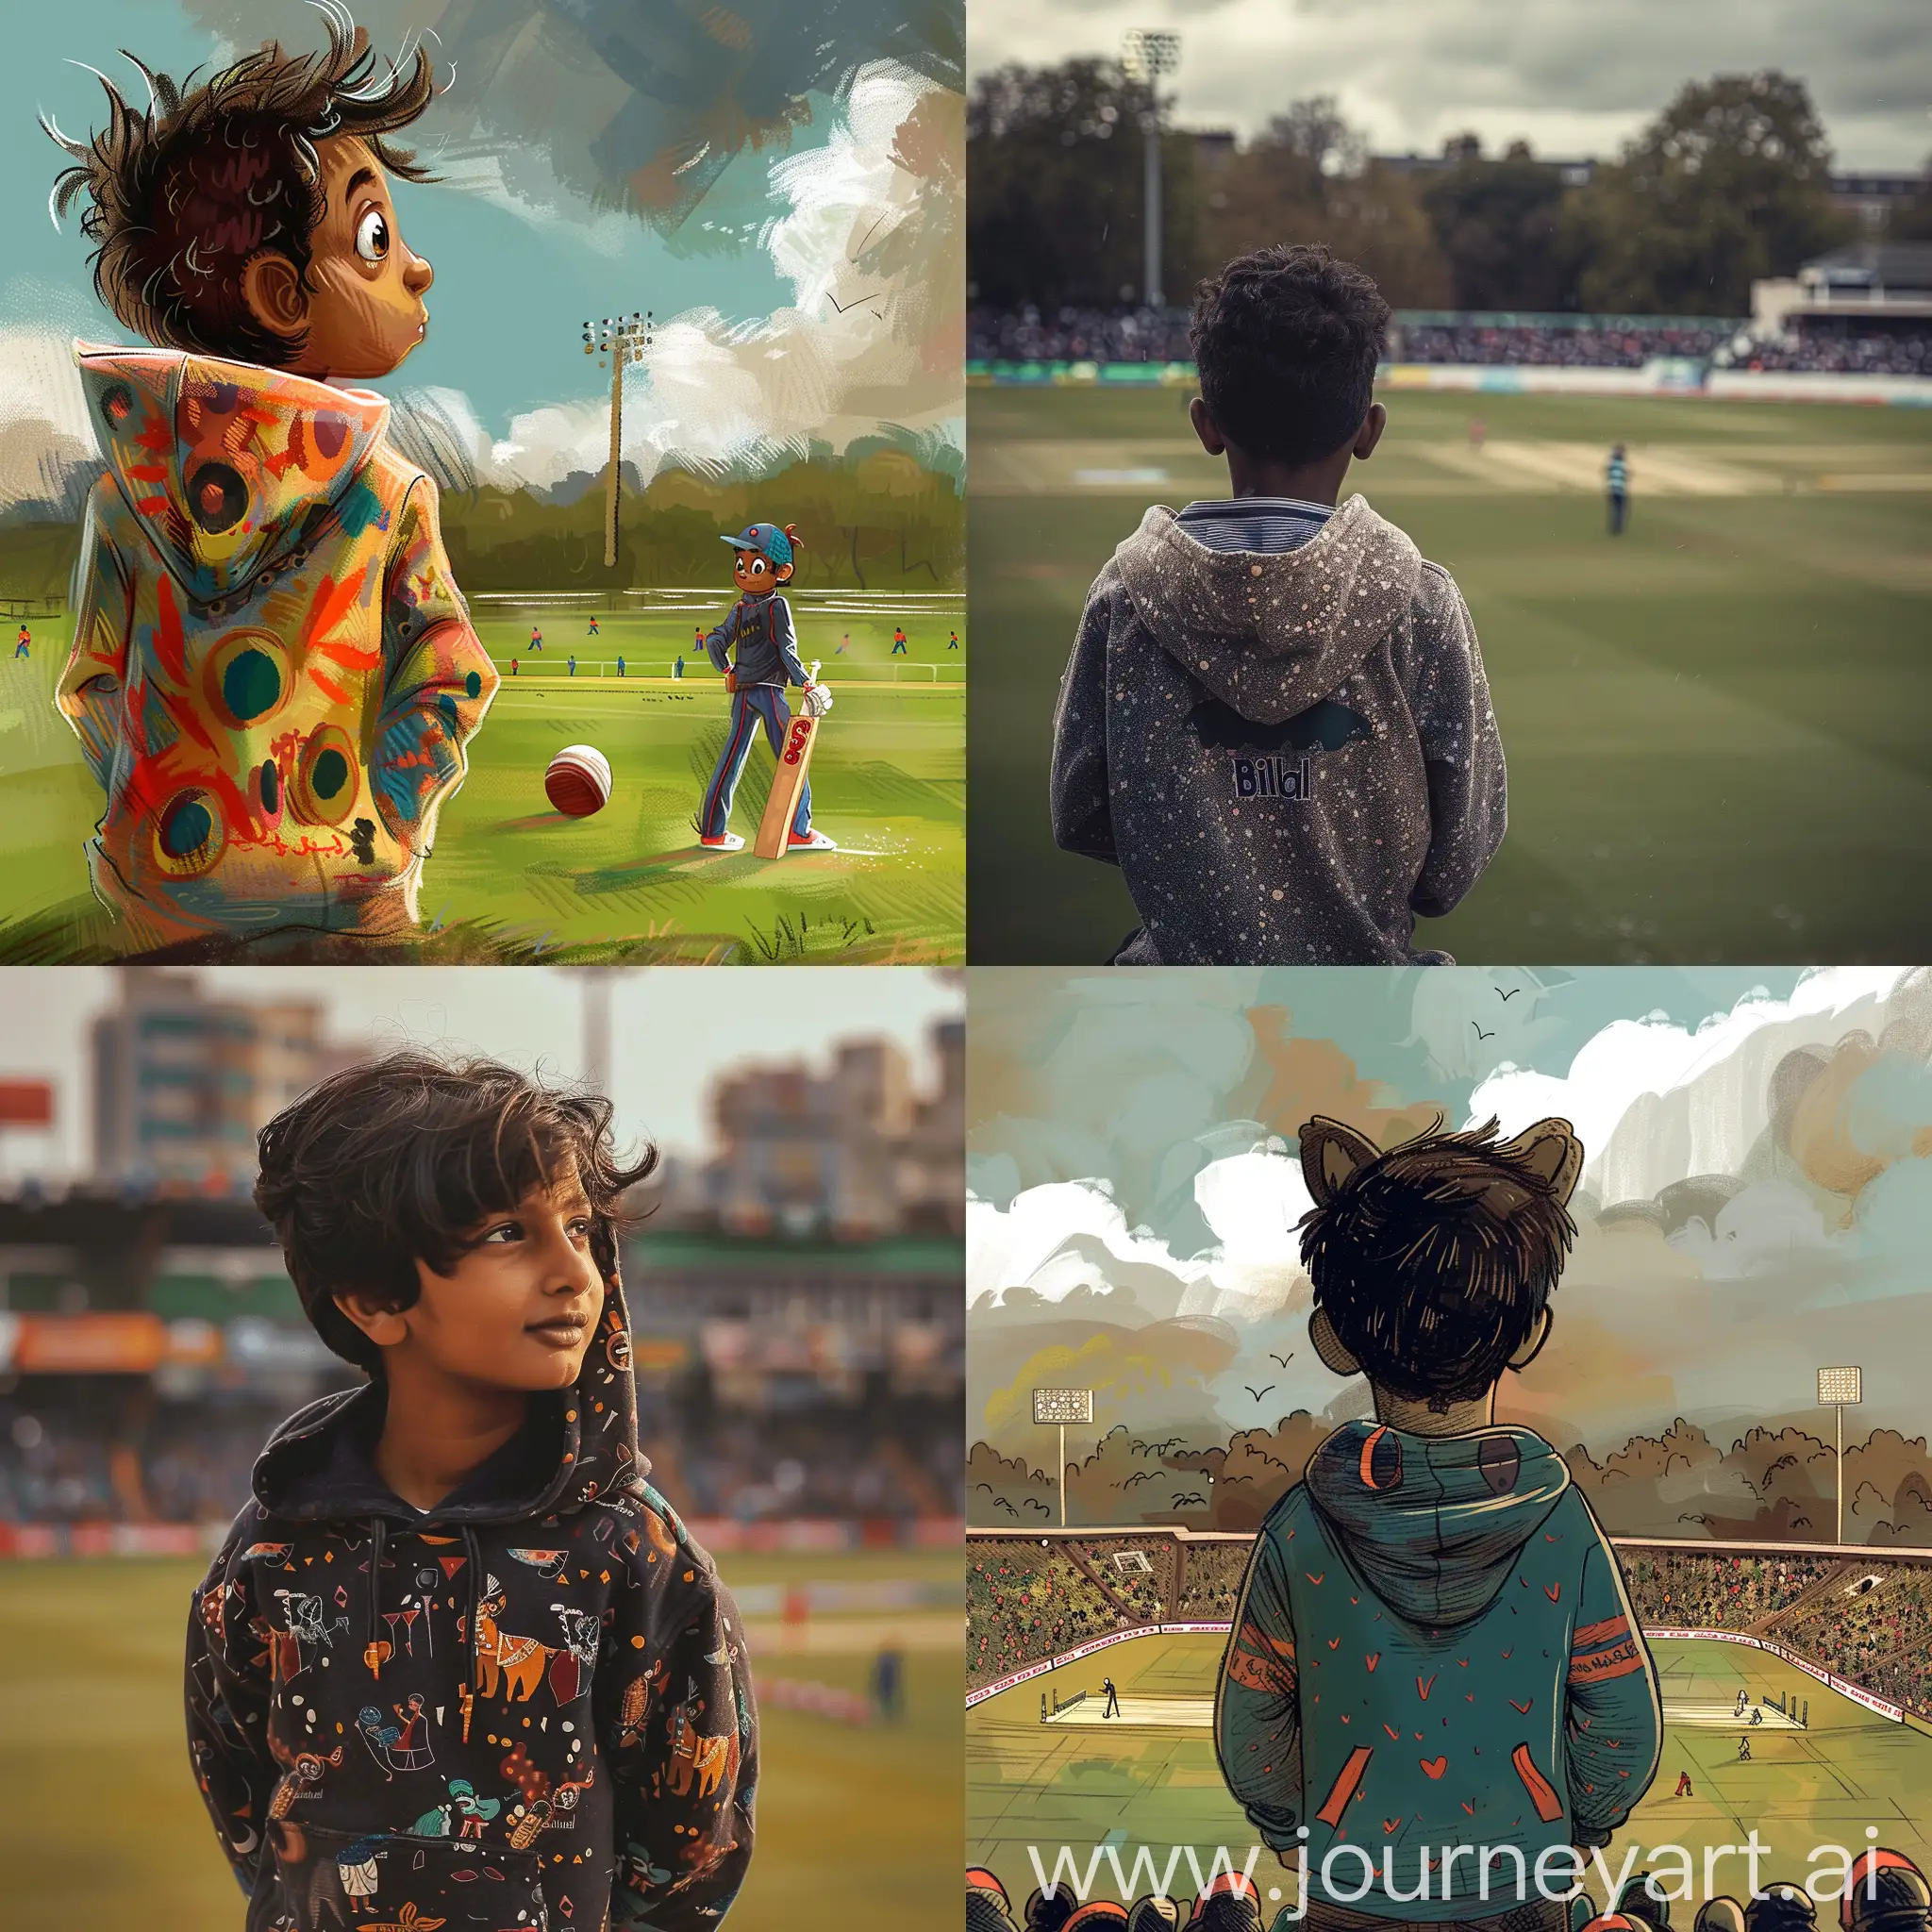 Young-Boy-Named-Bilal-Watching-Cricket-Match-in-Rad-Hoodie